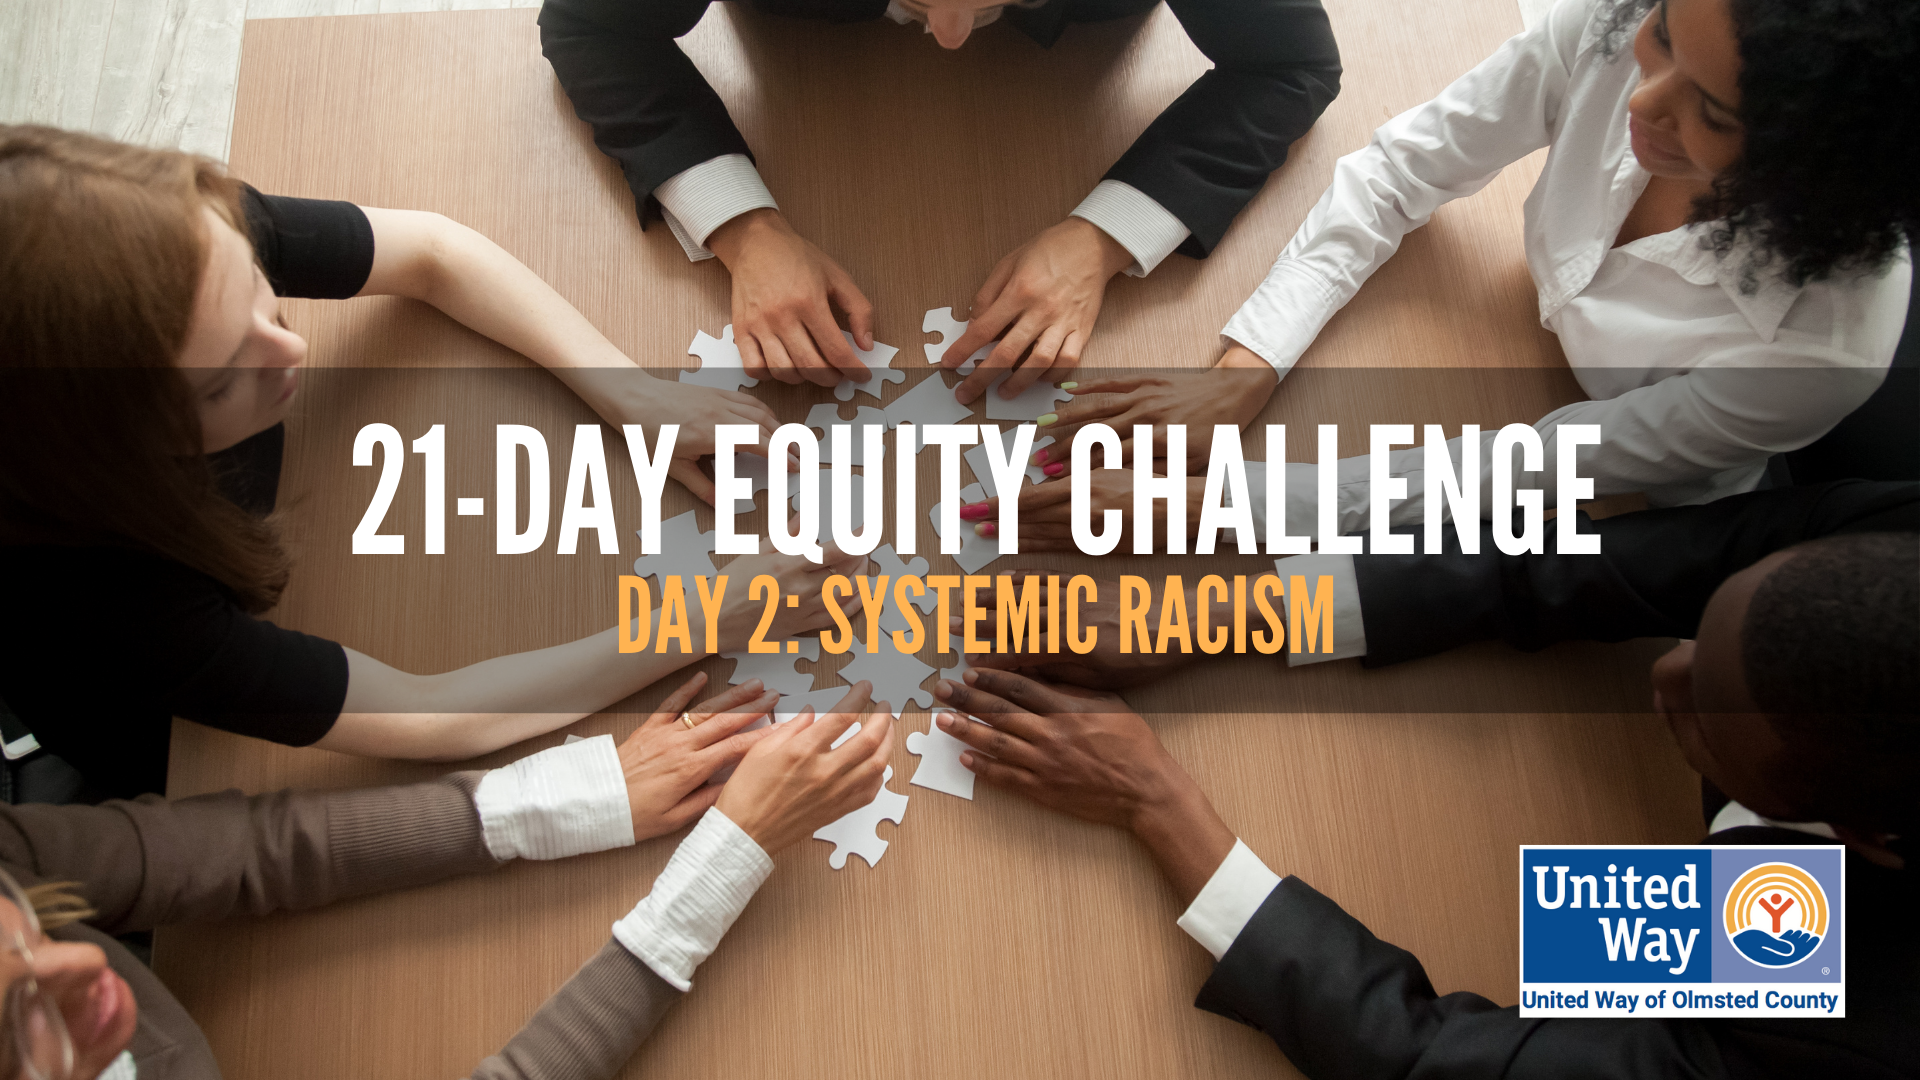 Day 2: Systemic Racism